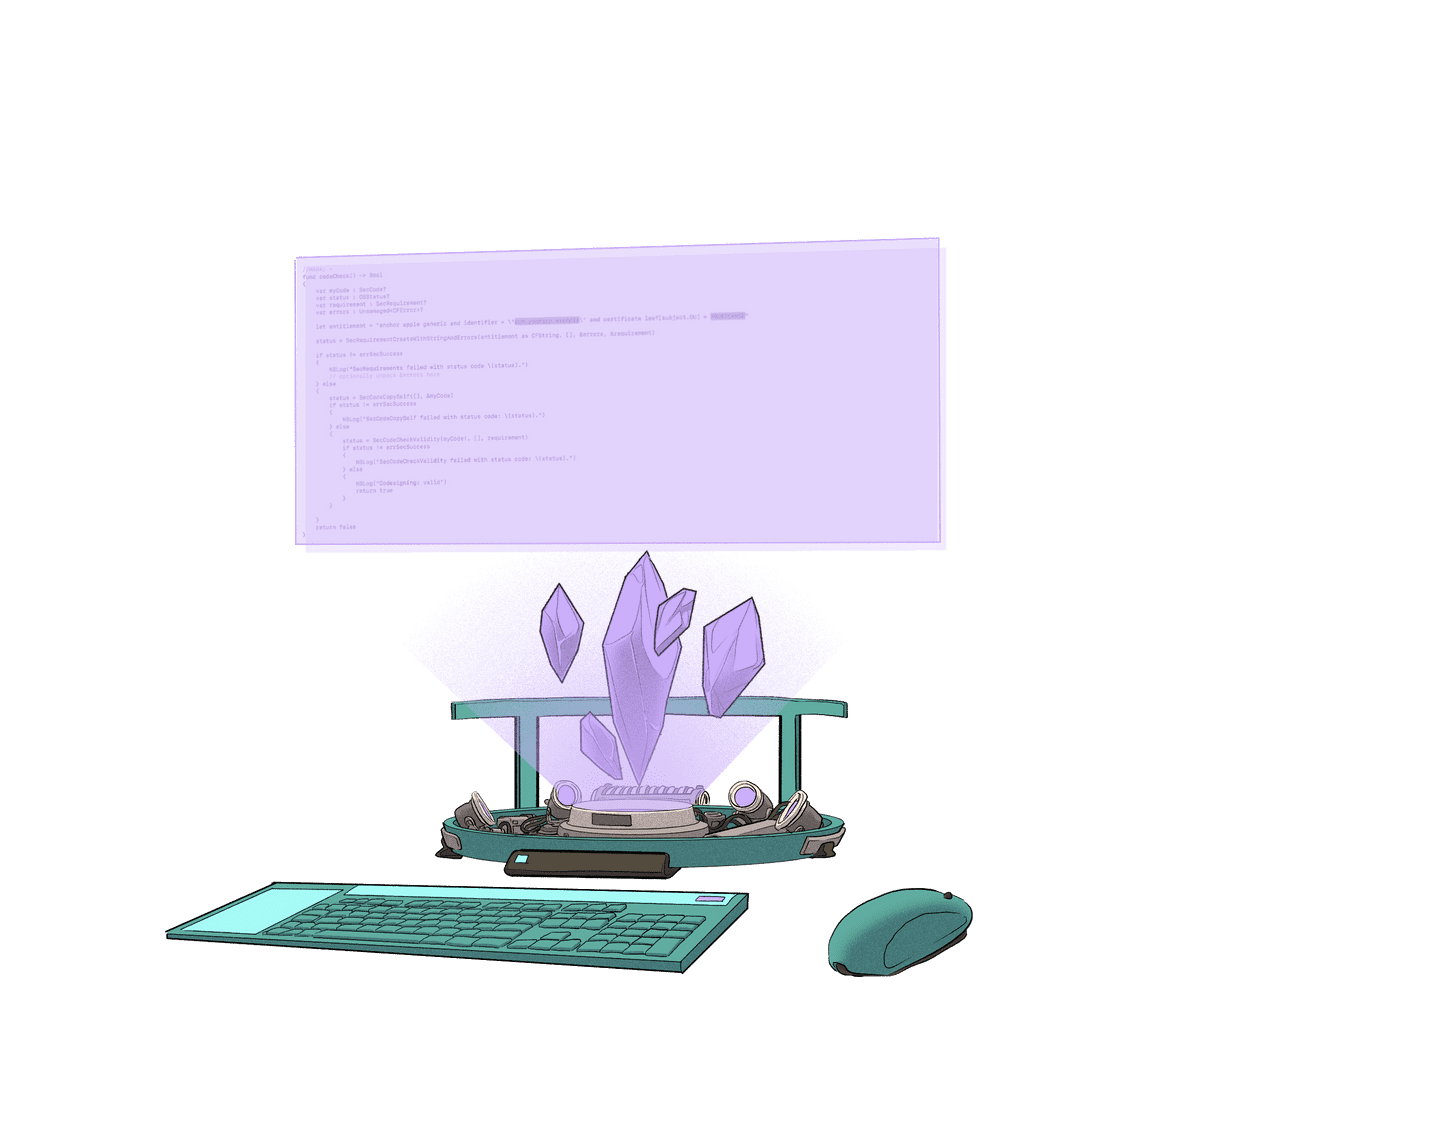 Illustration of a futuristic computer set up, powered by Ethereum crystals.